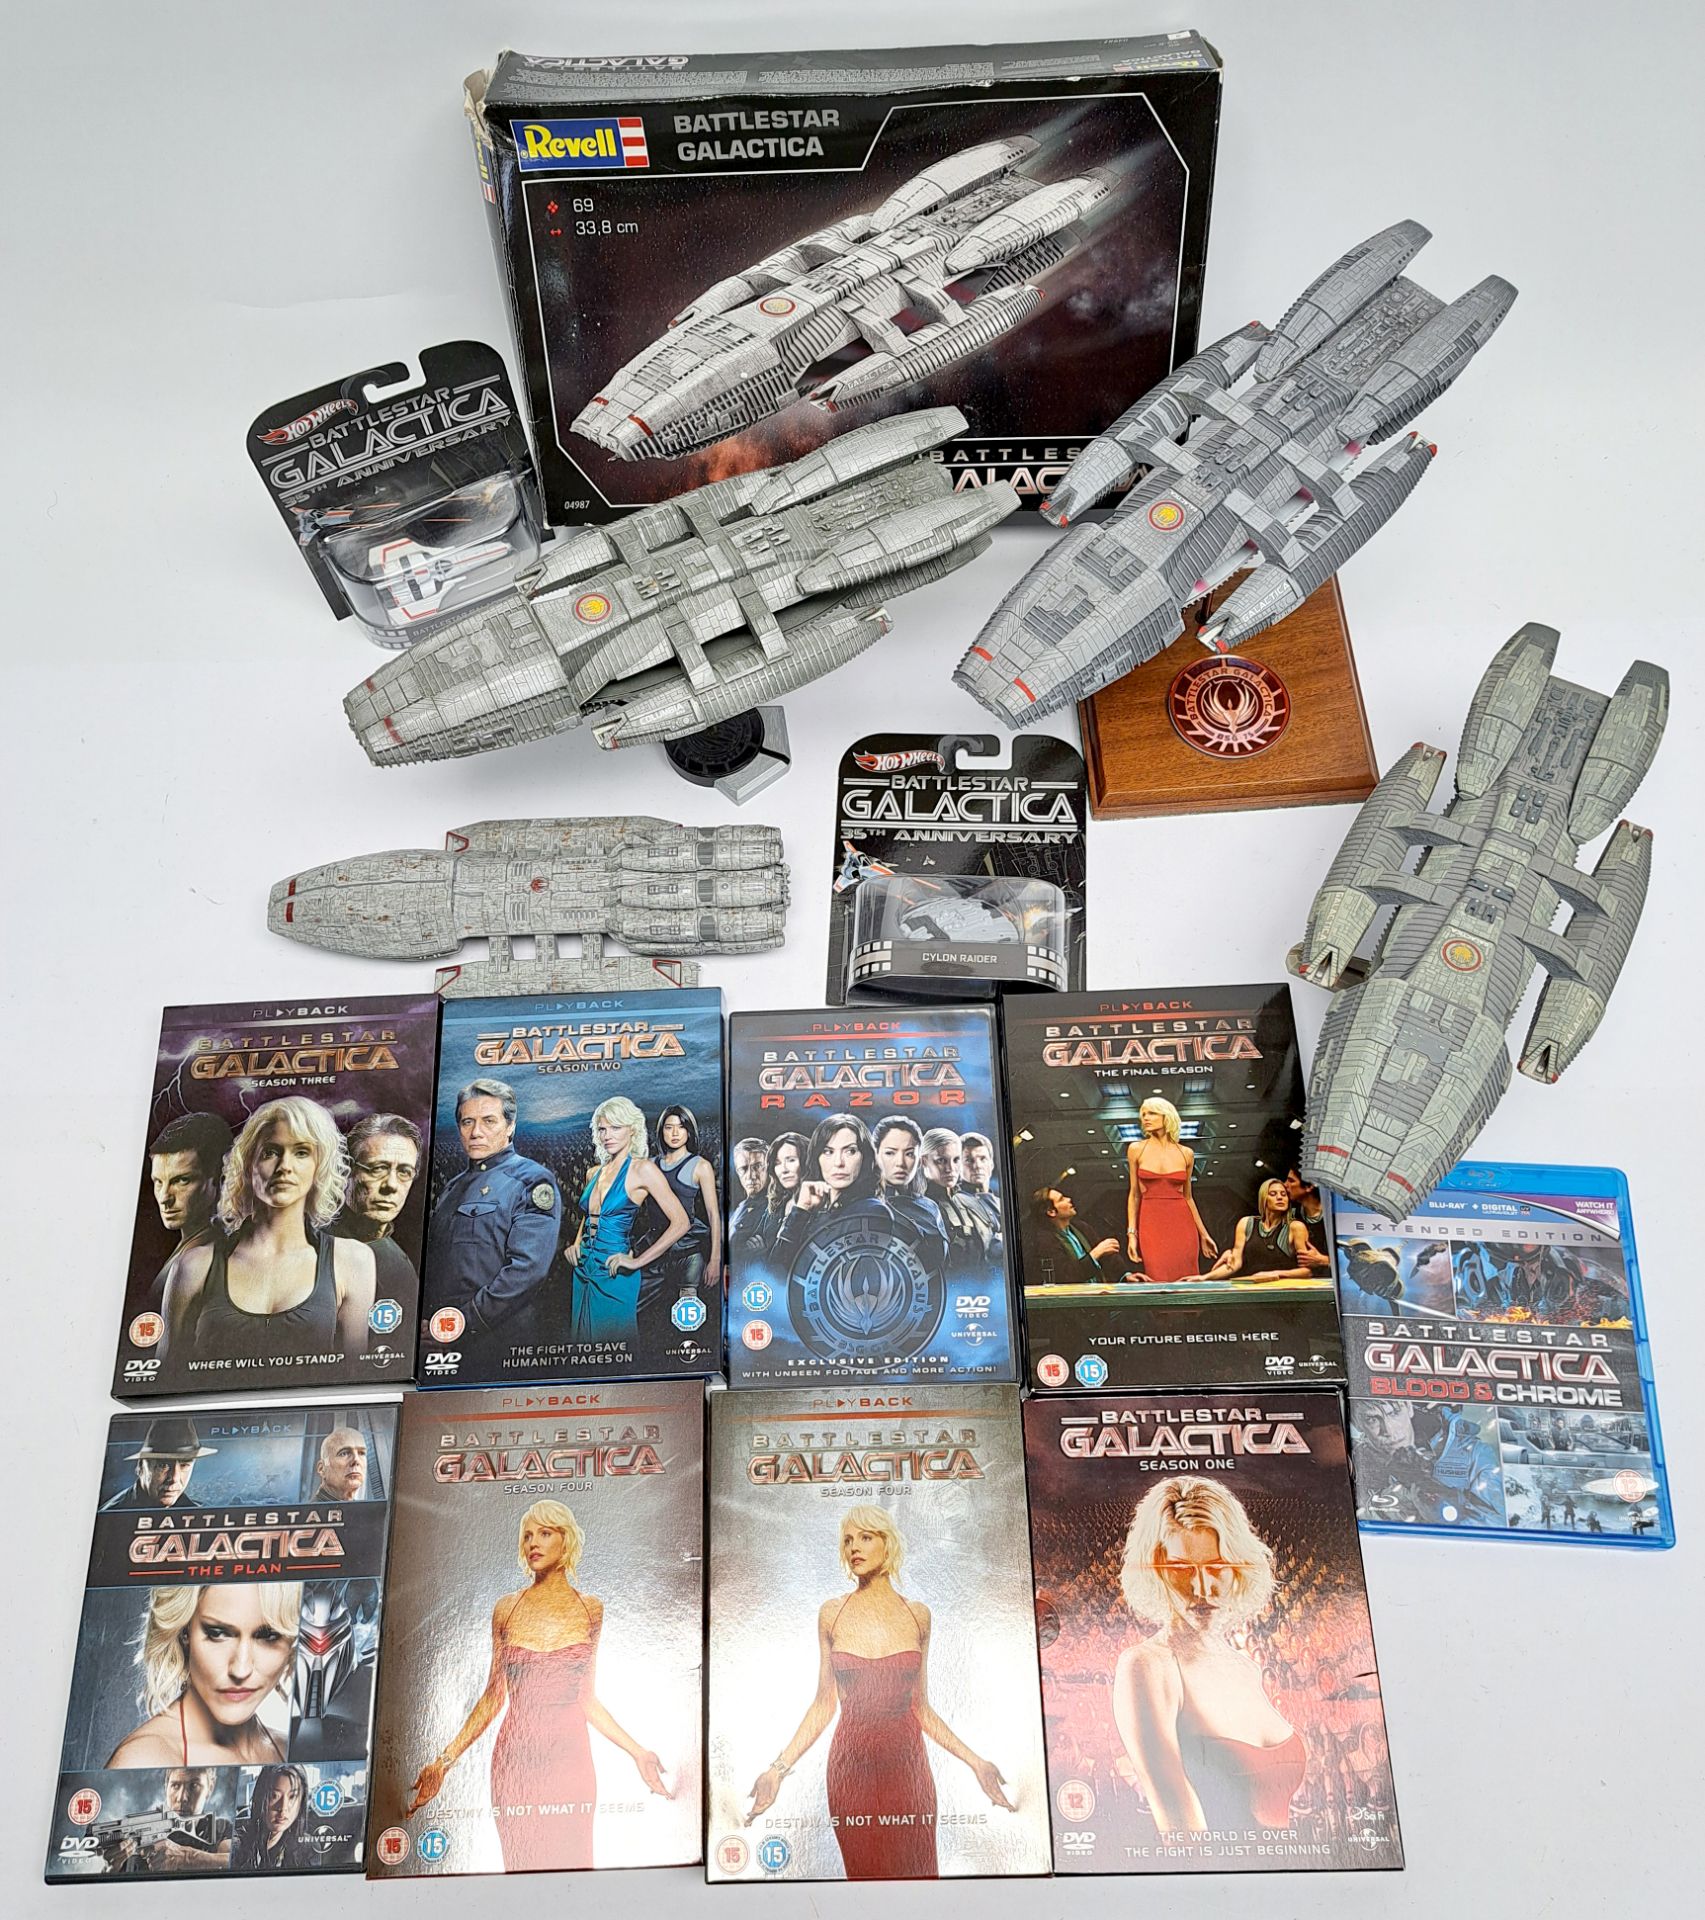 Hot Wheels, Revell, Battlestar Galactica Ships and DVD/Blu-ray mixed assorted lot. Excellent to n...